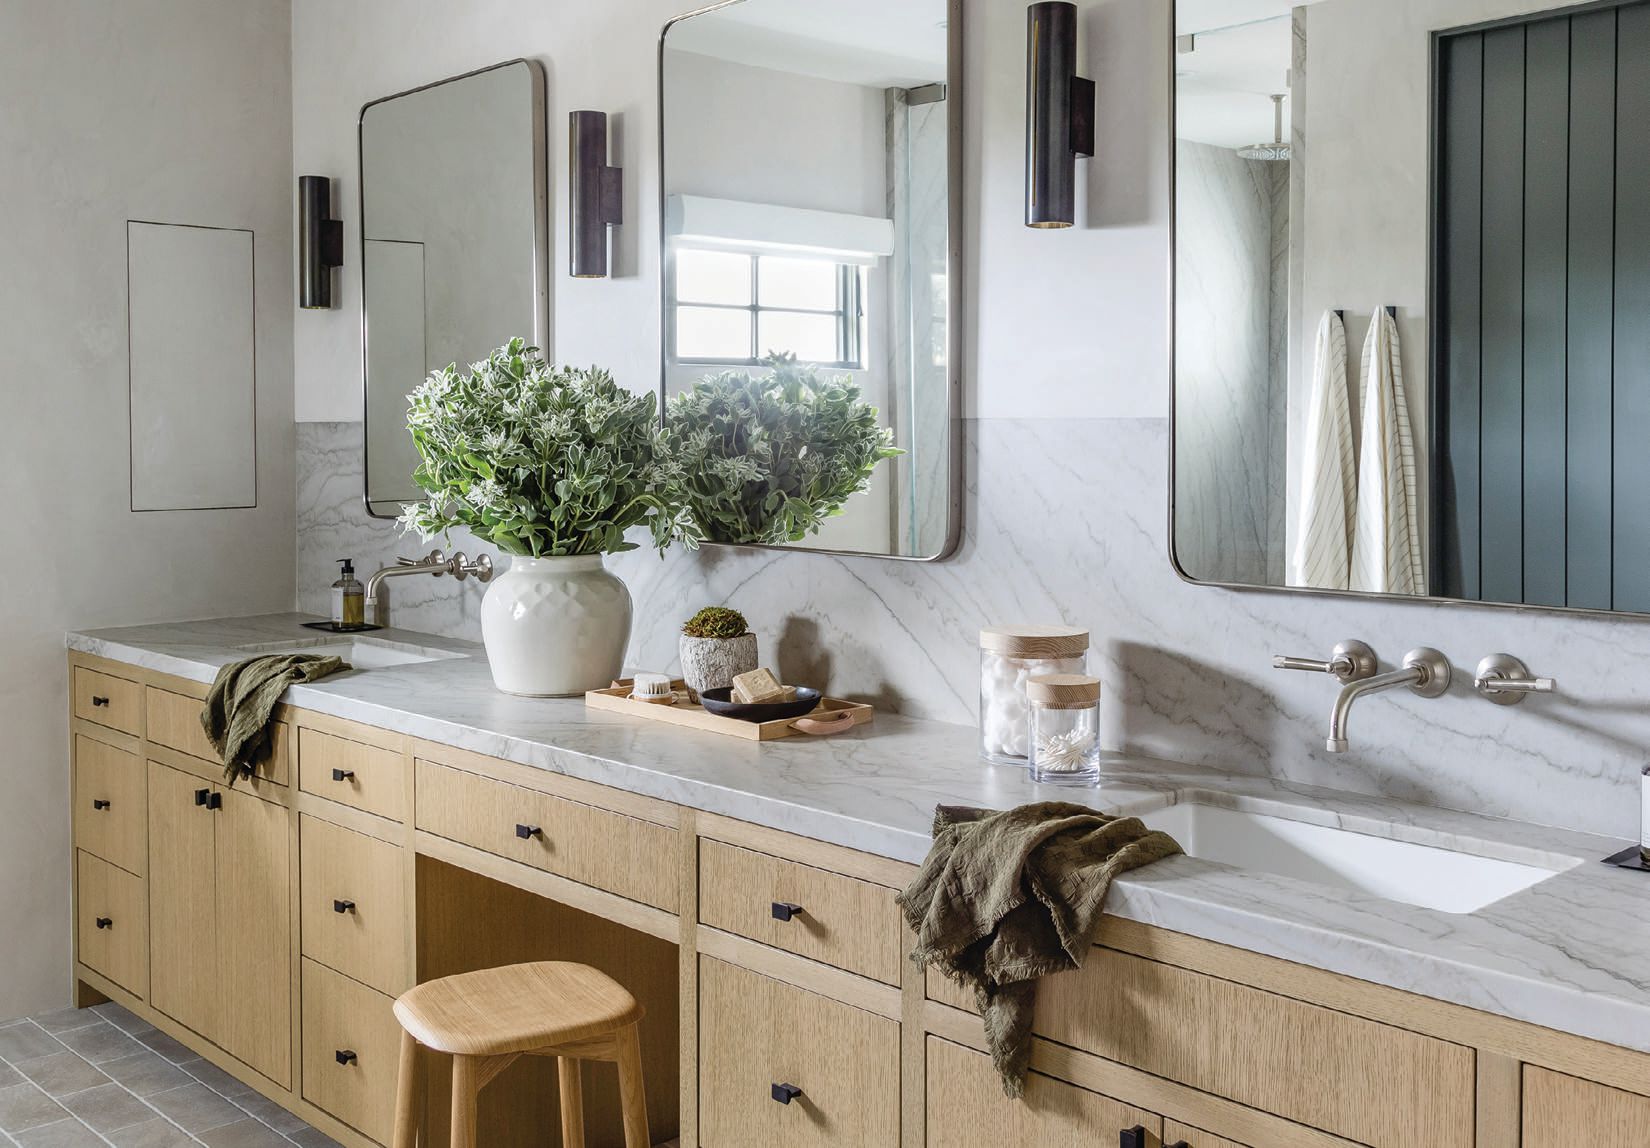 The main bath flaunts a dual vanity with a sea pearl quartzite countertop. PHOTOGRAPHED BY VANESSA LENTINE